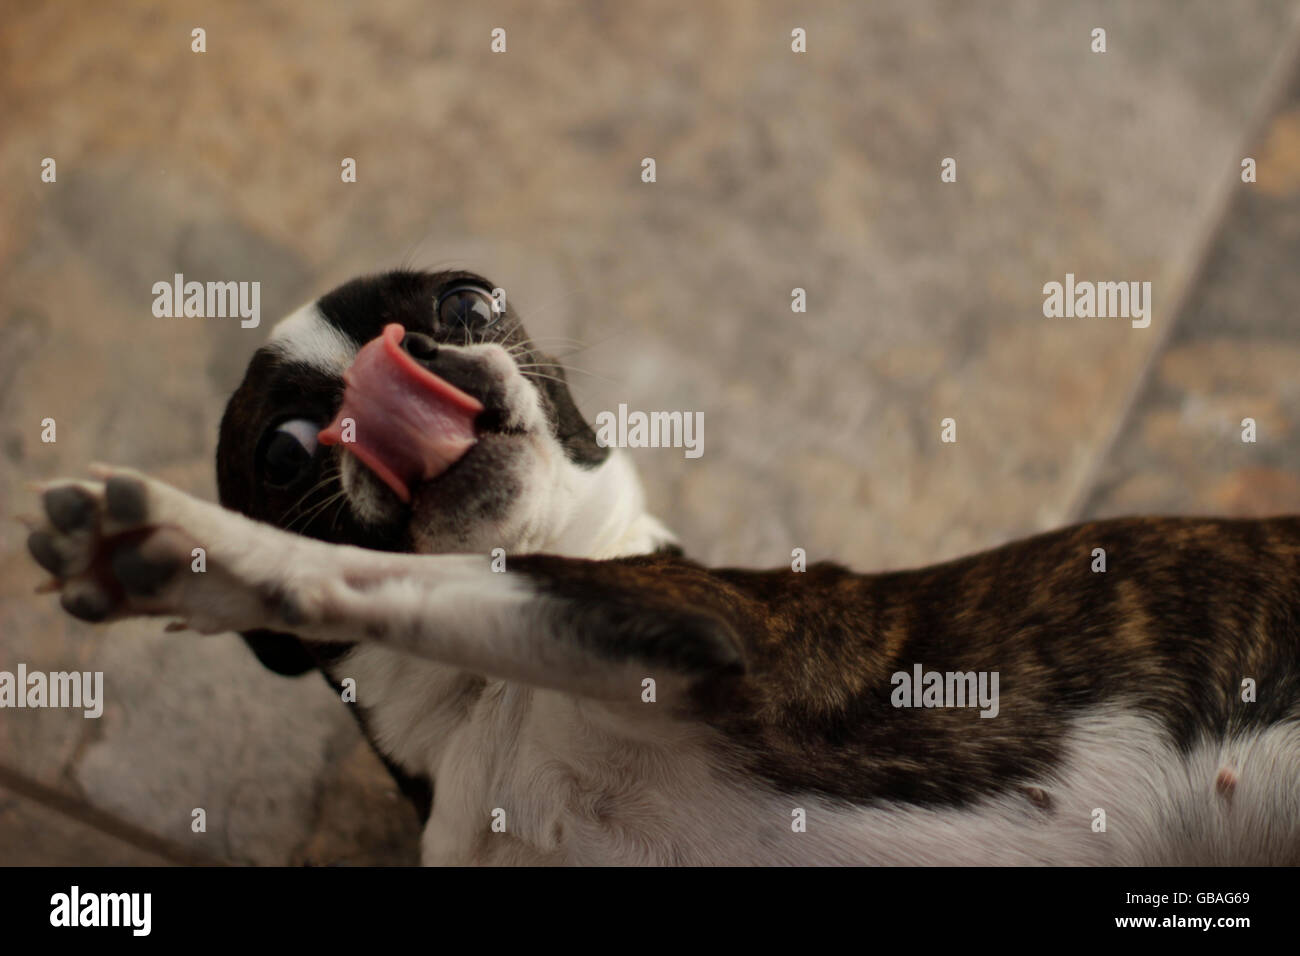 Photograph of a Boston Terrier puppy dog on a mosaic floor Stock Photo